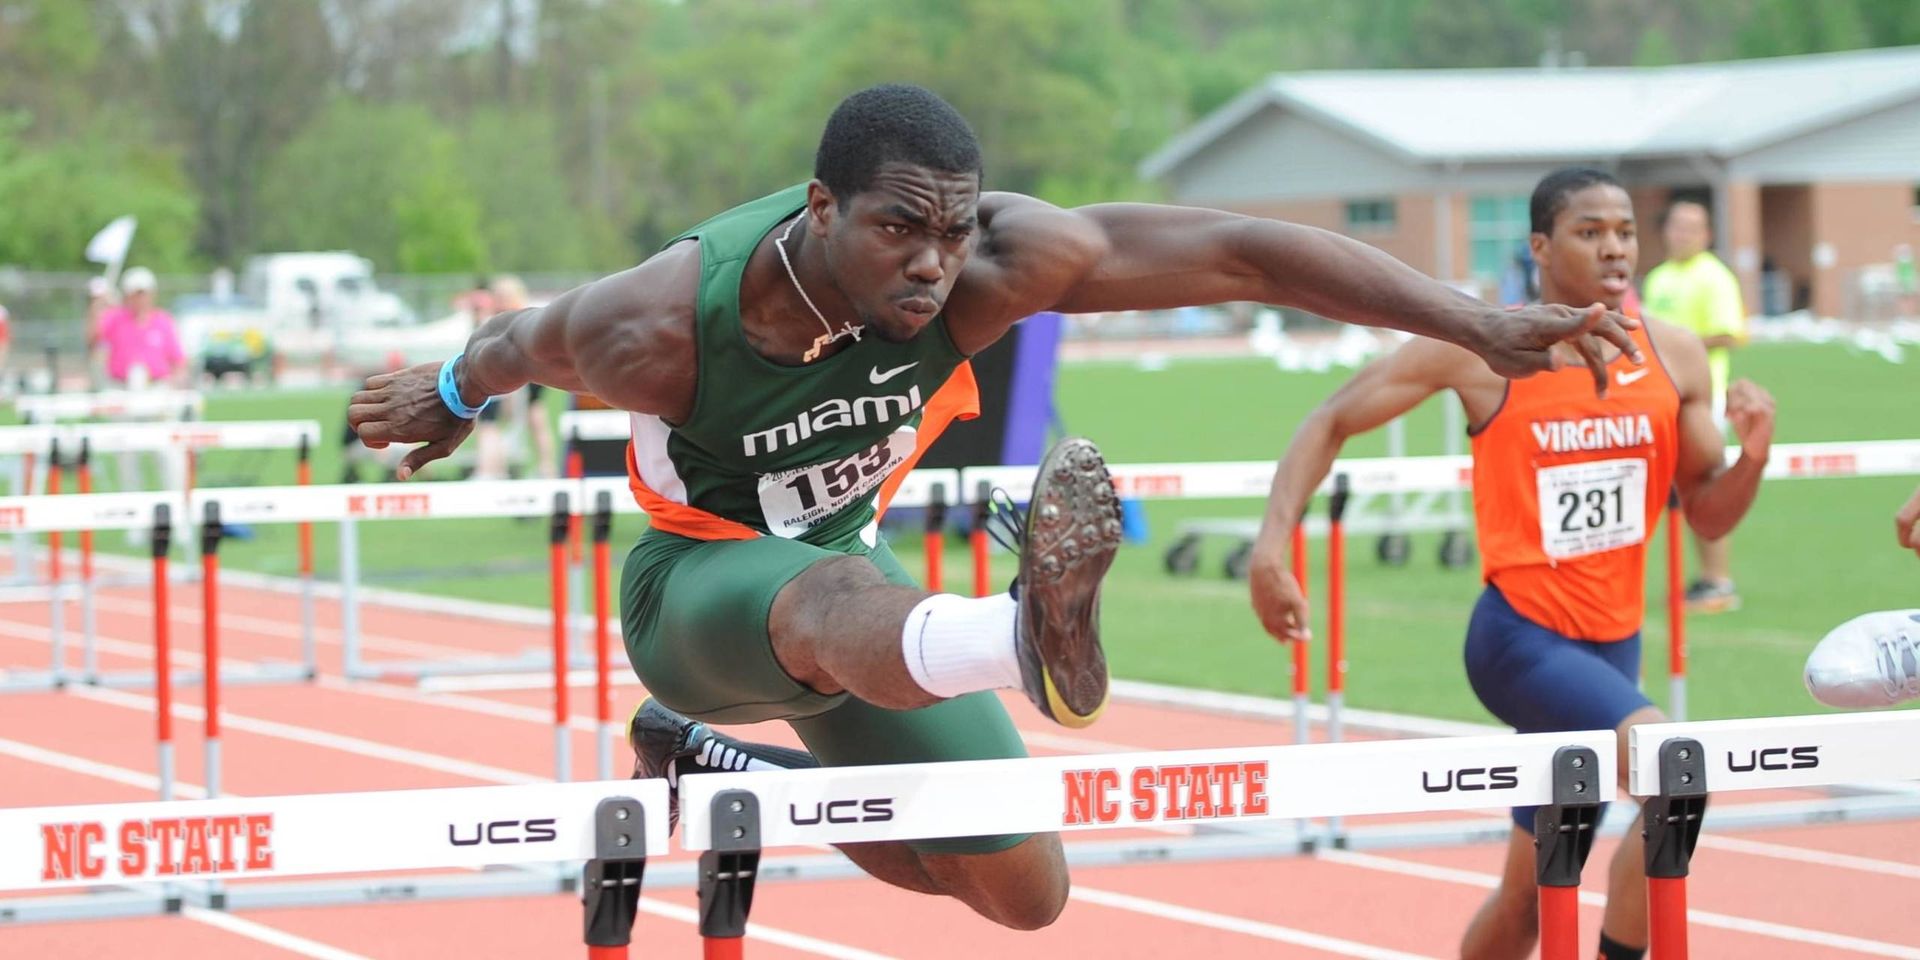 Track Wraps Up at ACC Outdoor Championships